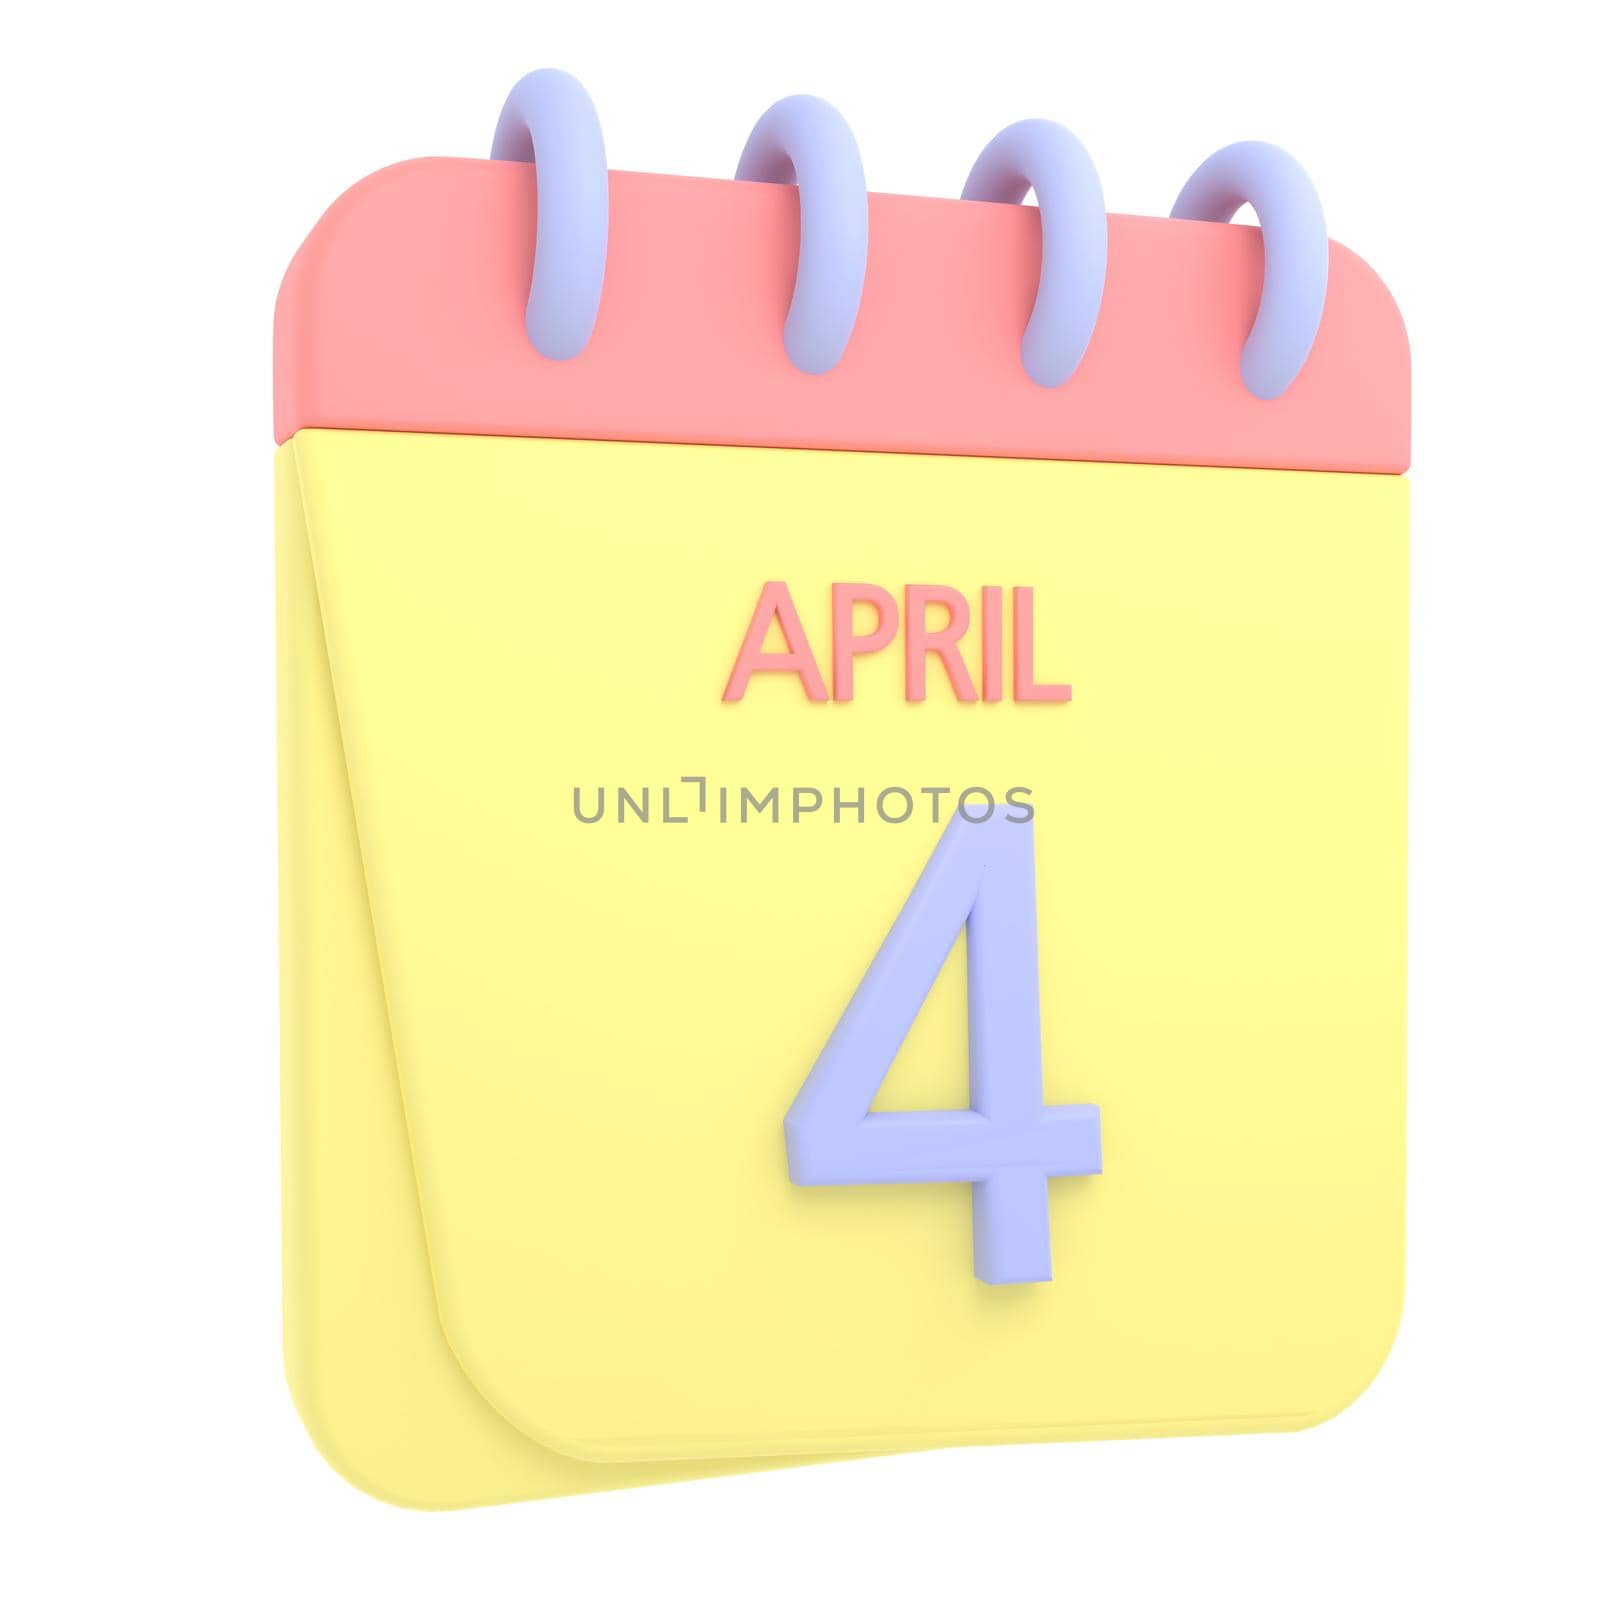 4th April 3D calendar icon. Web style. High resolution image. White background